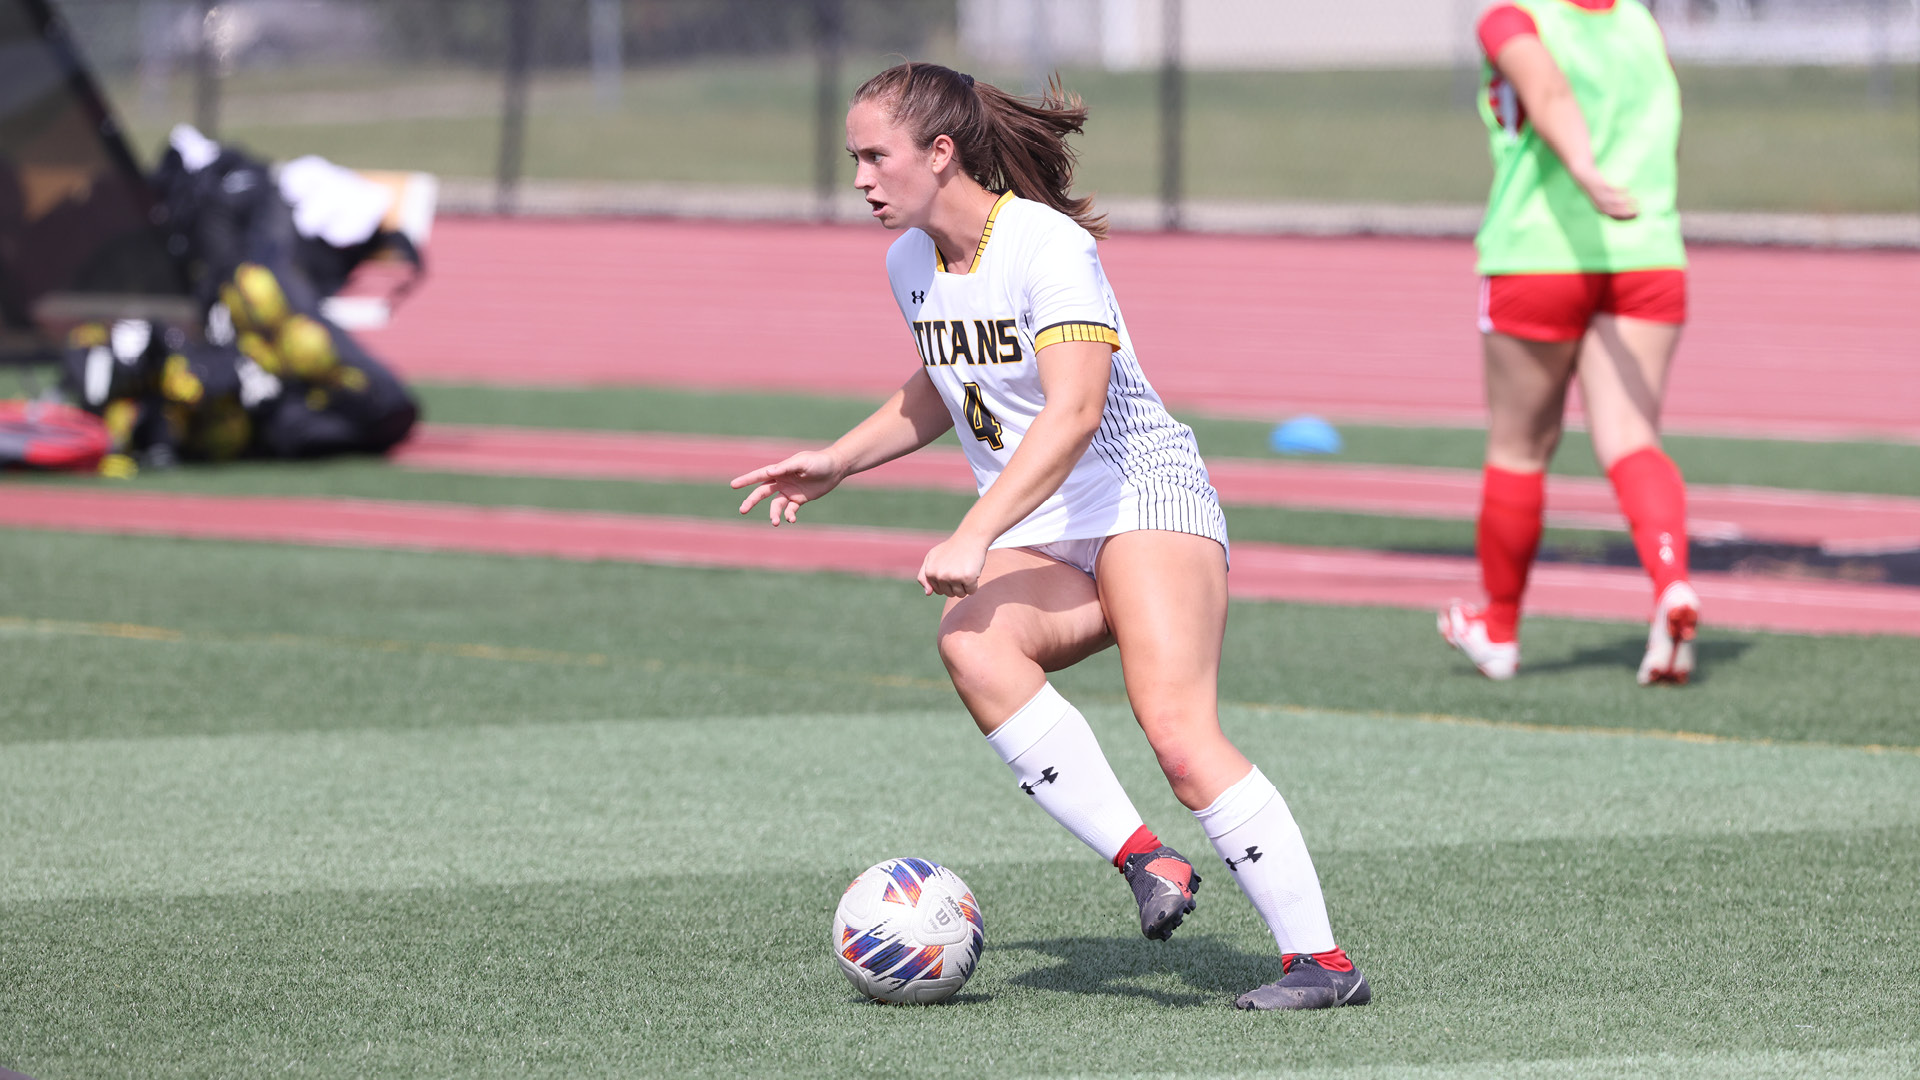 Rylie Kaufmann scored her third goal of the season against the Britons on Saturday